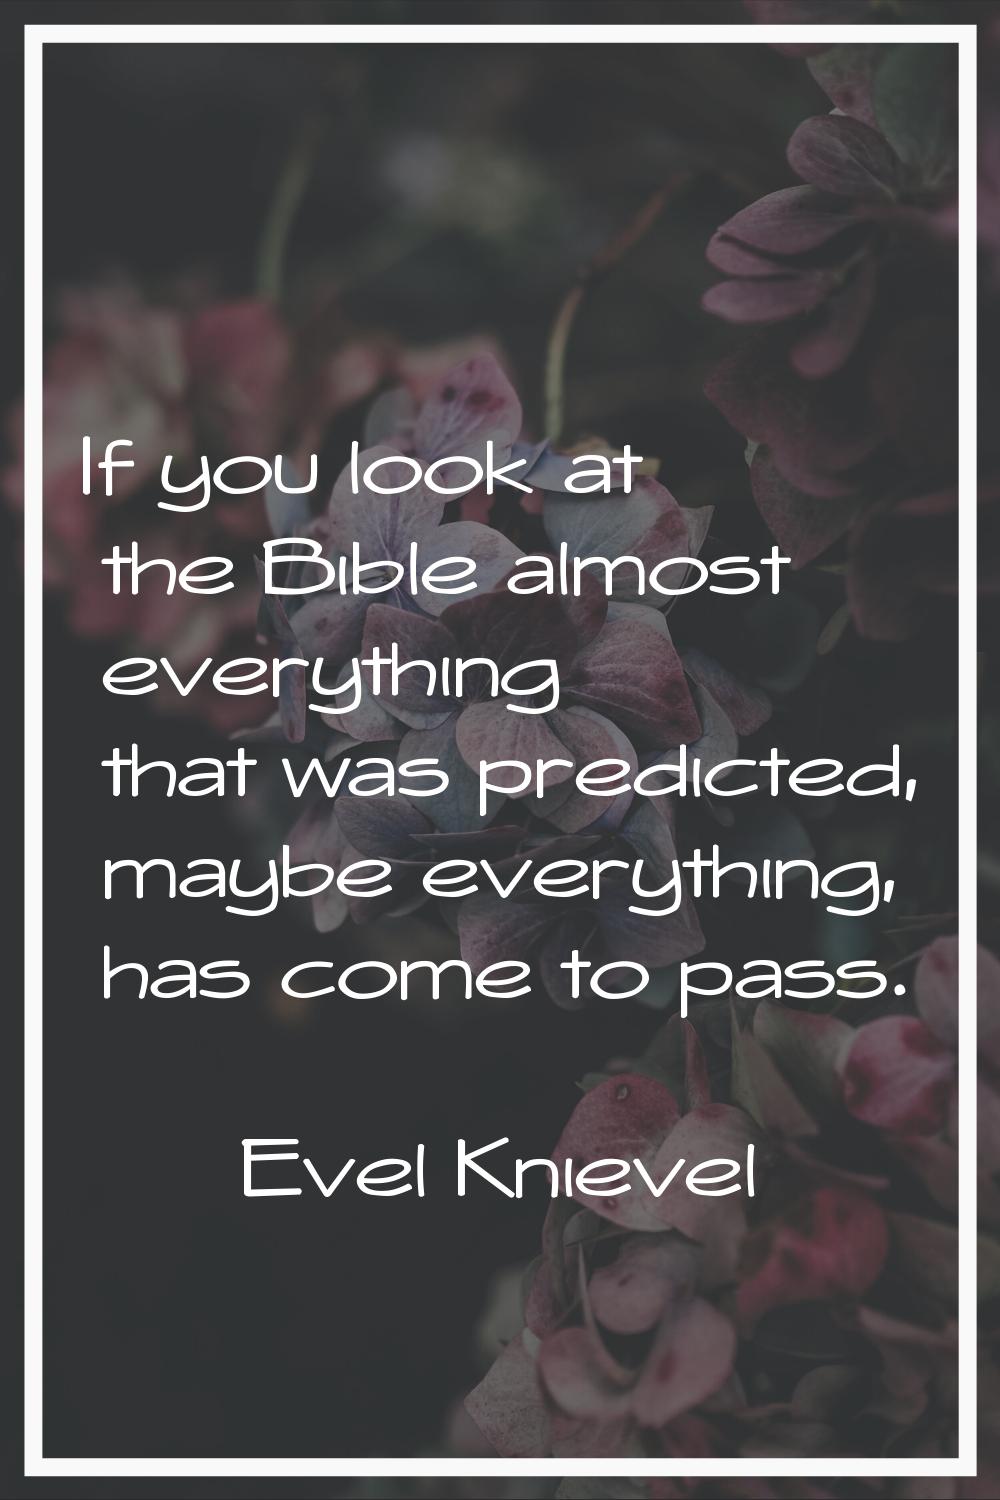 If you look at the Bible almost everything that was predicted, maybe everything, has come to pass.